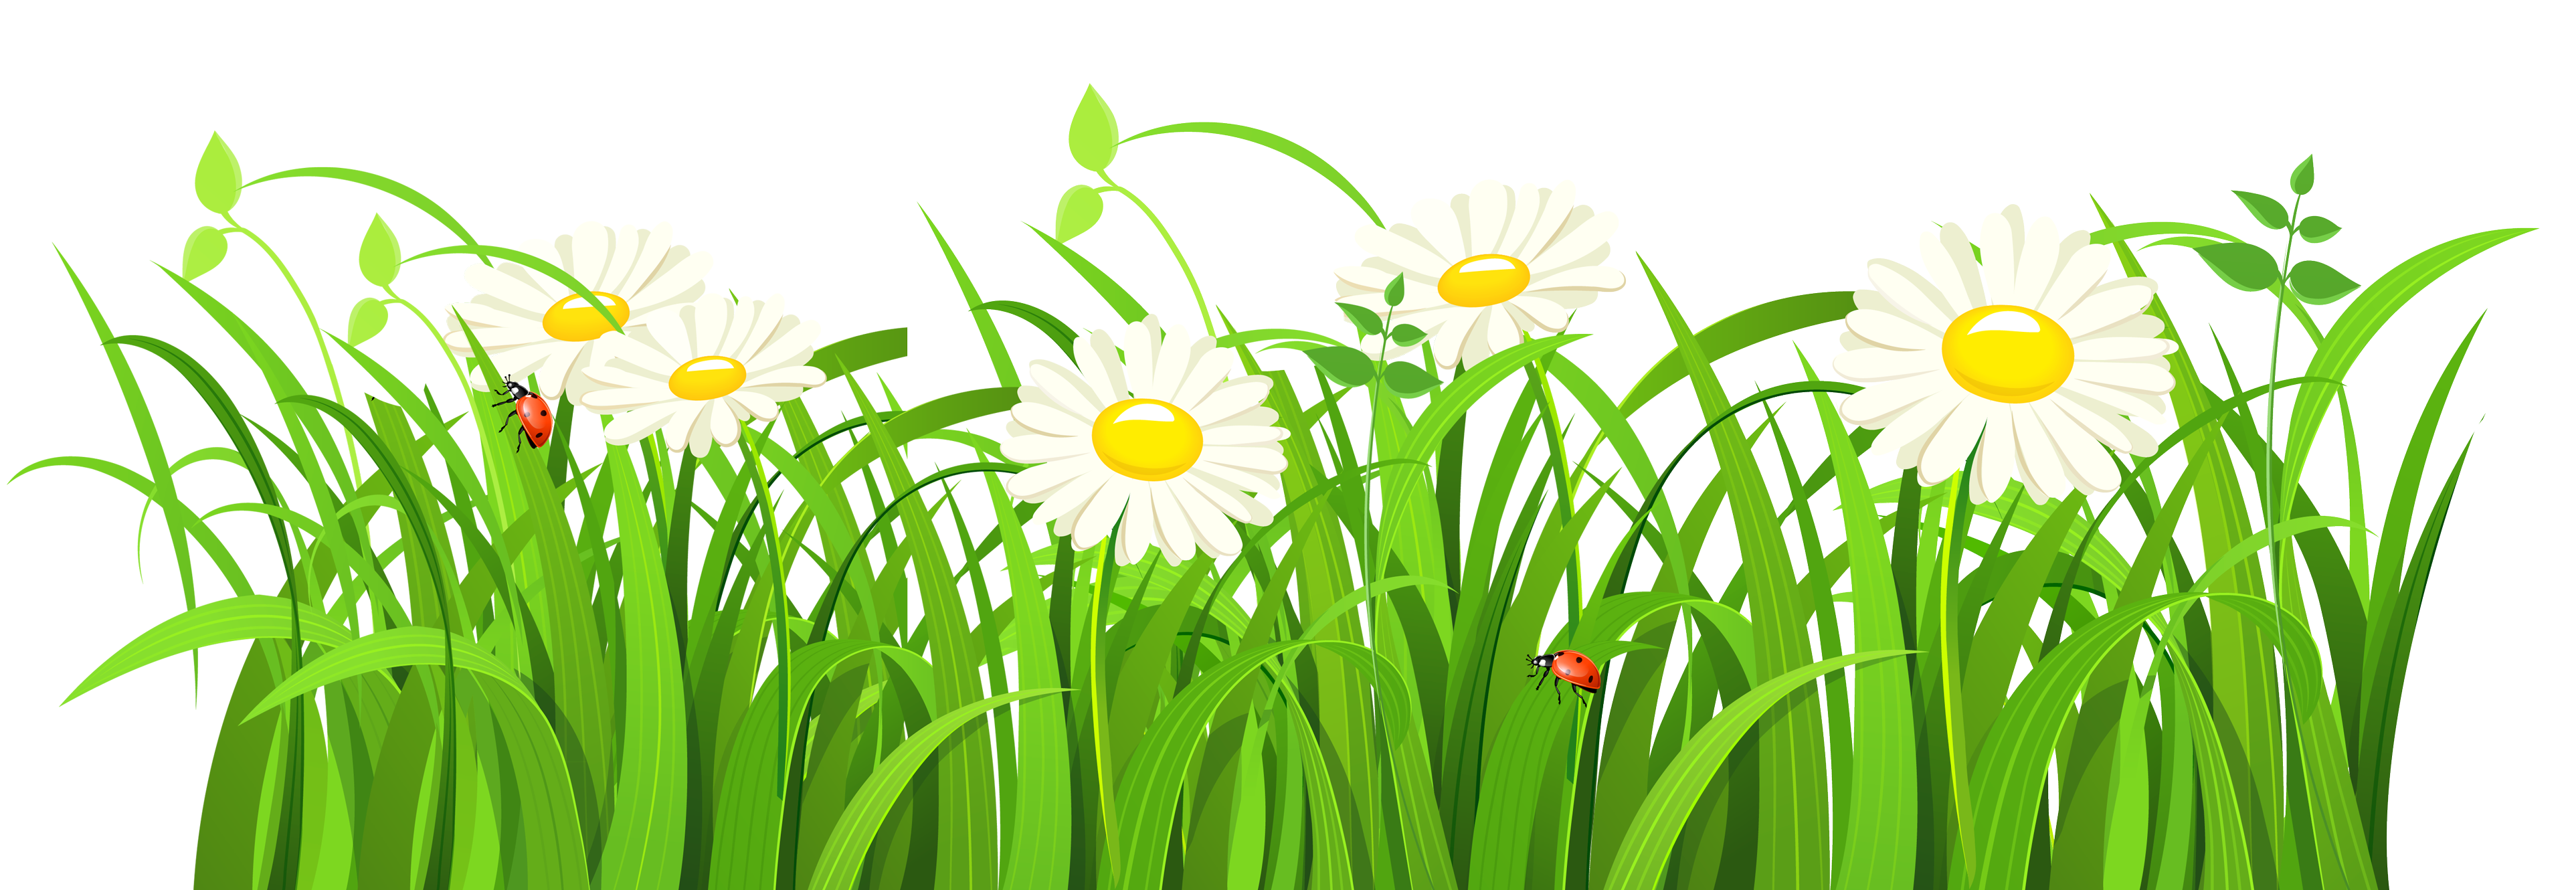 Grass Vector PNG Image